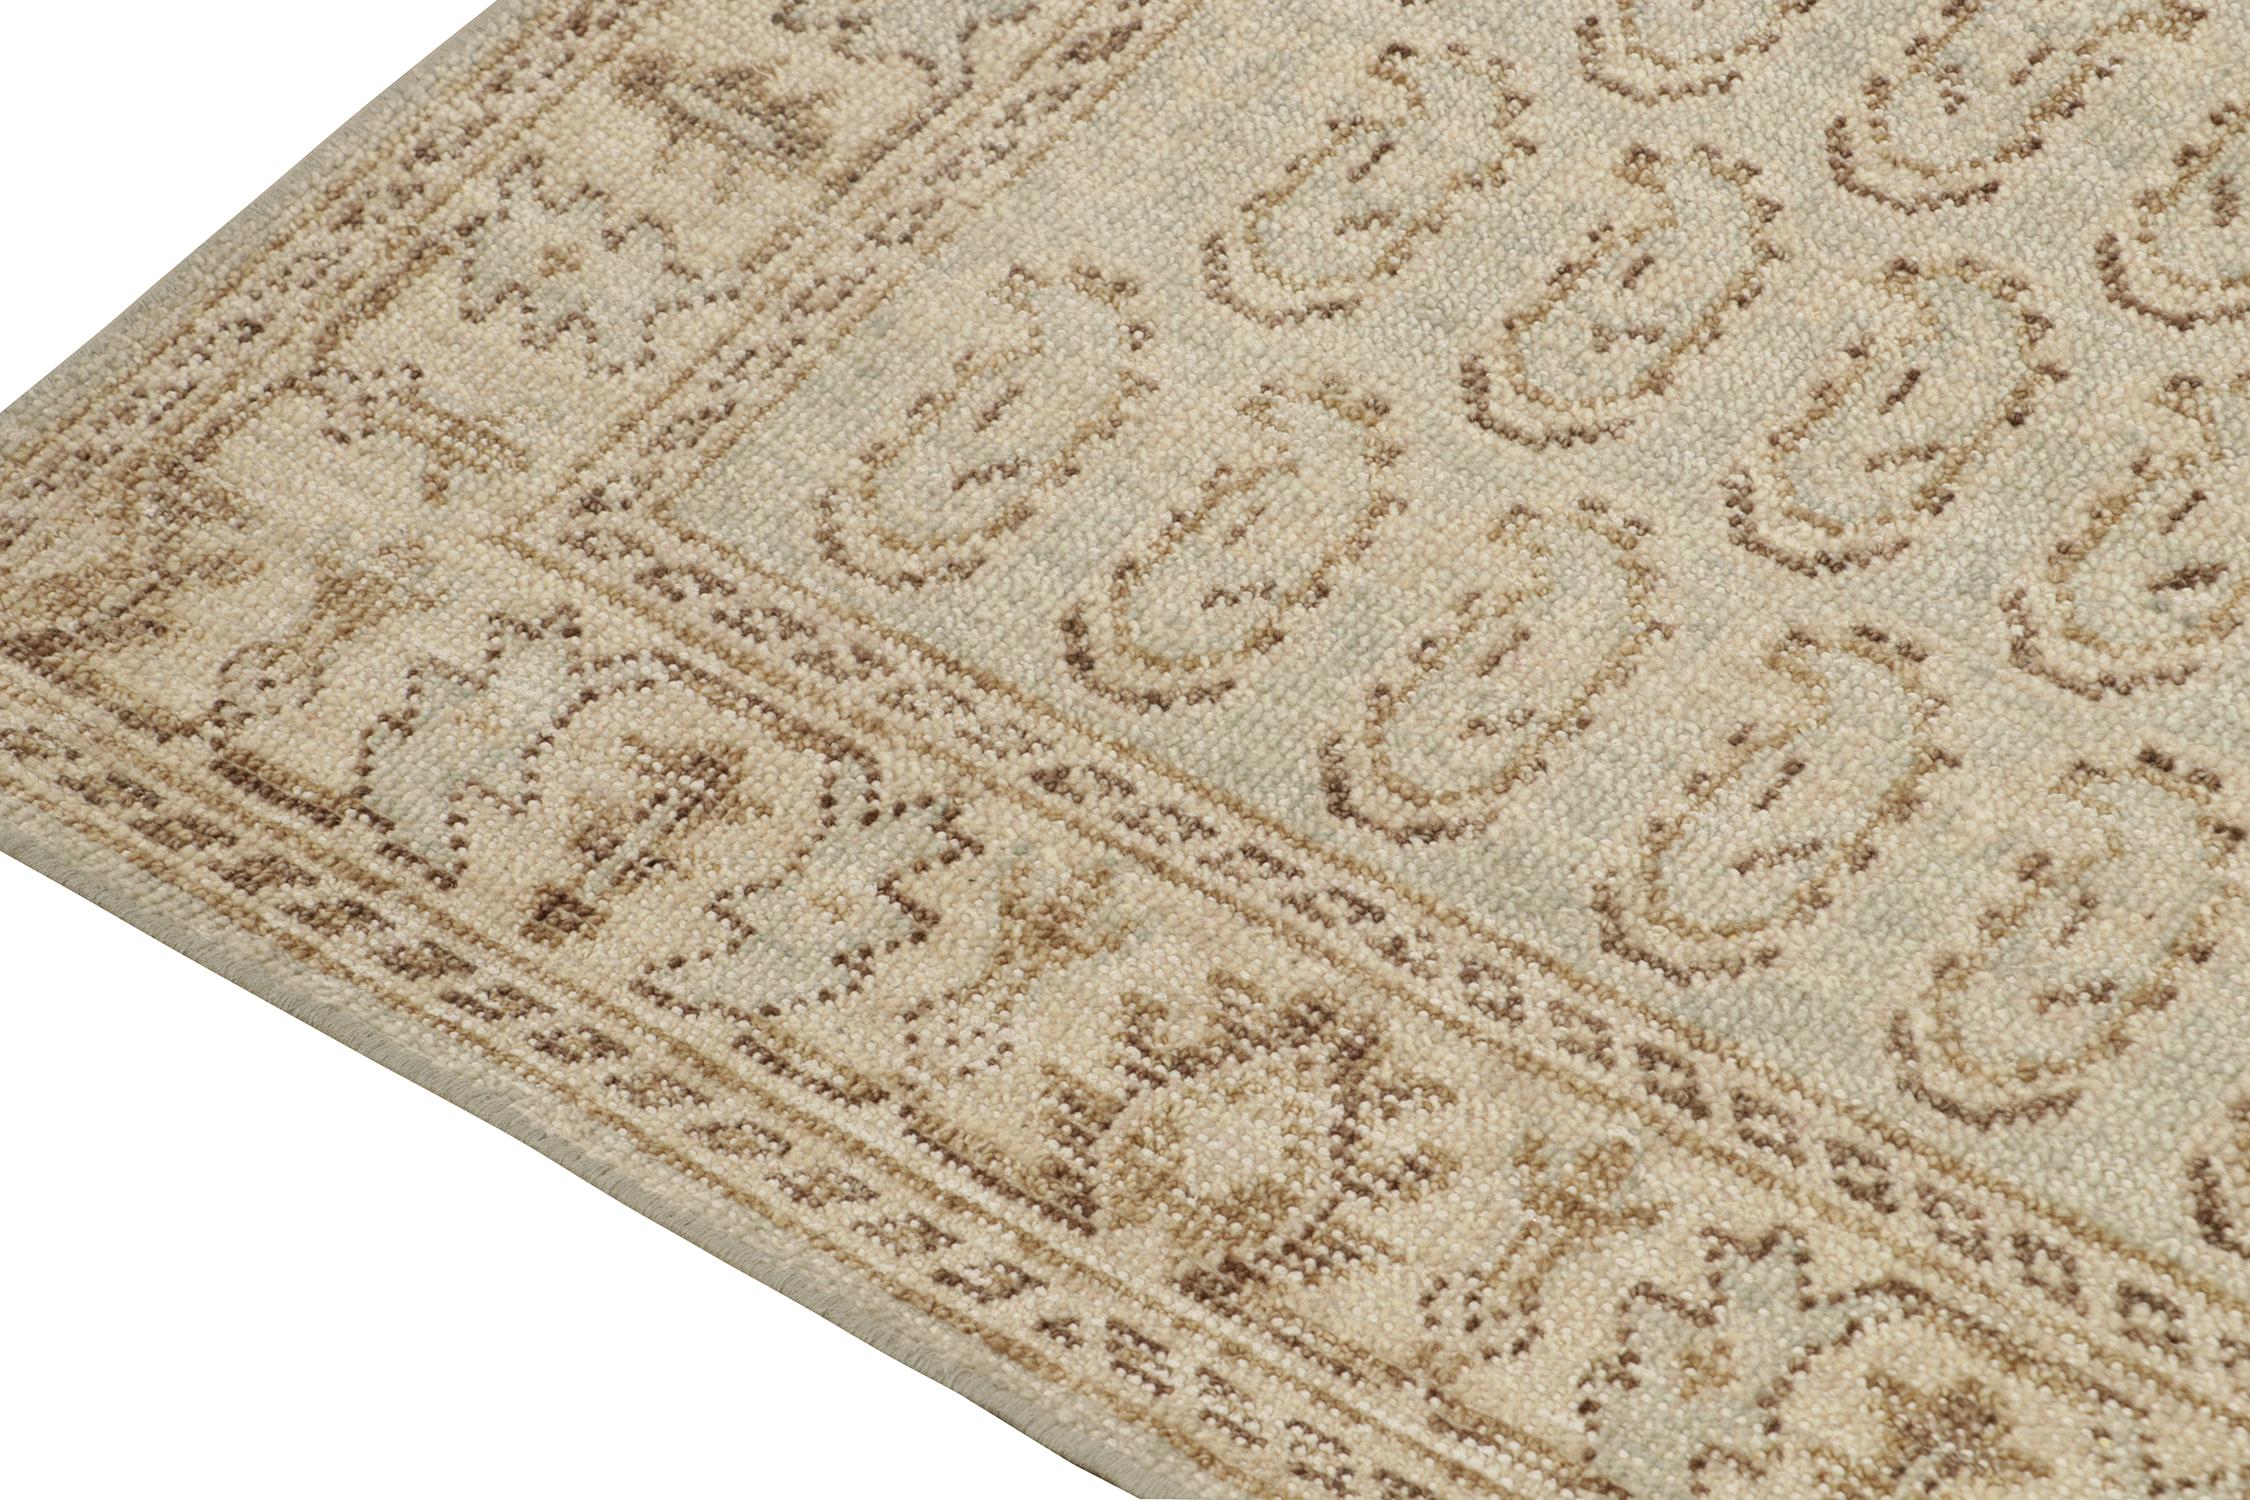 Rug & Kilim’s Tribal Style Runner in Blue with Beige-Brown Paisley Patterns In New Condition For Sale In Long Island City, NY